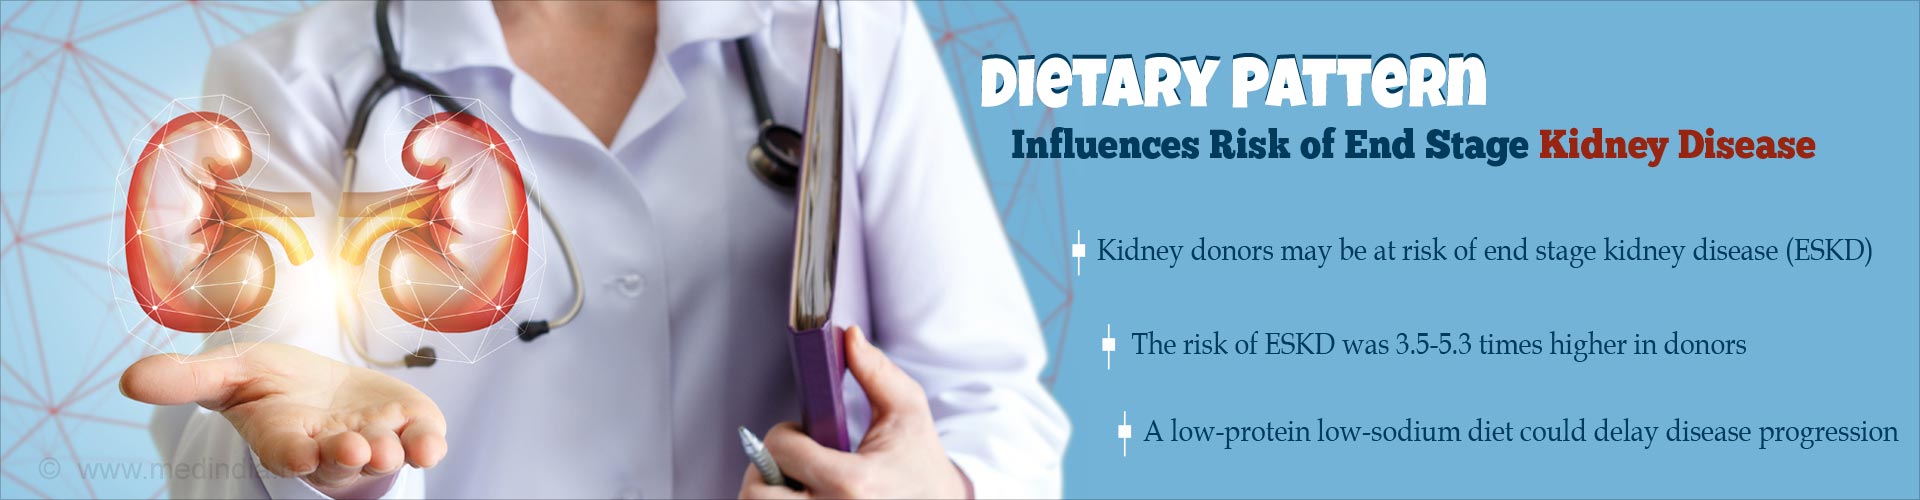 Dietary pattern influences risk of end stage kidney disease
- Kidney donors may be at risk of end stage kidney disease (ESKD)
- The risk of ESKR was 3.5-5.3 times higher in donors
- a low-protein low-sodium diet could delay disease progression